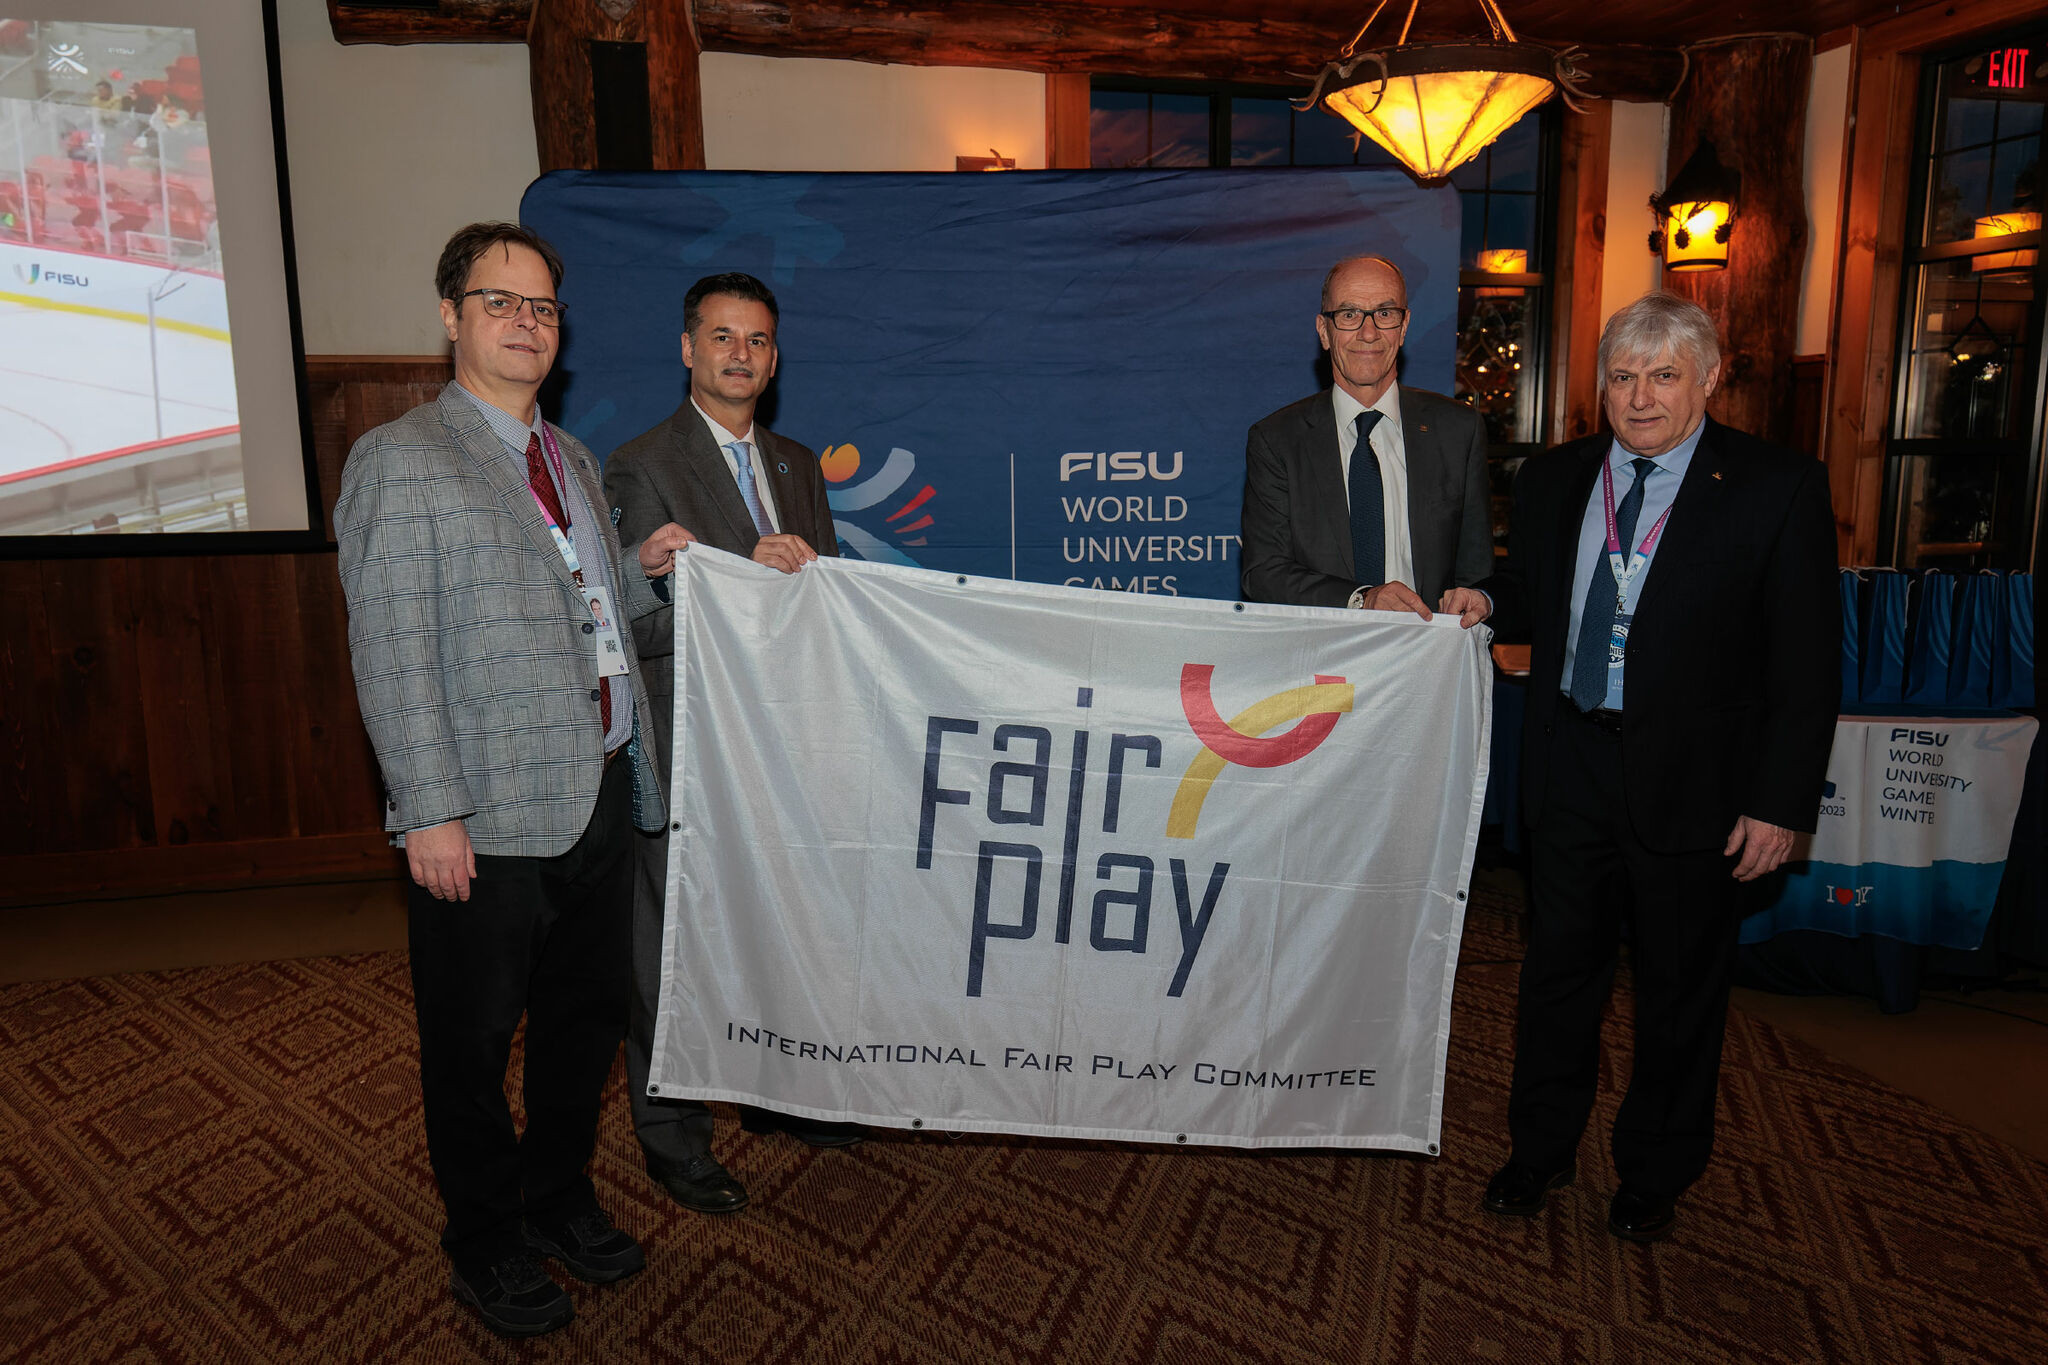 Ukraine has been presented with the Fair Play Award at Lake Placid 2023 ©FISU